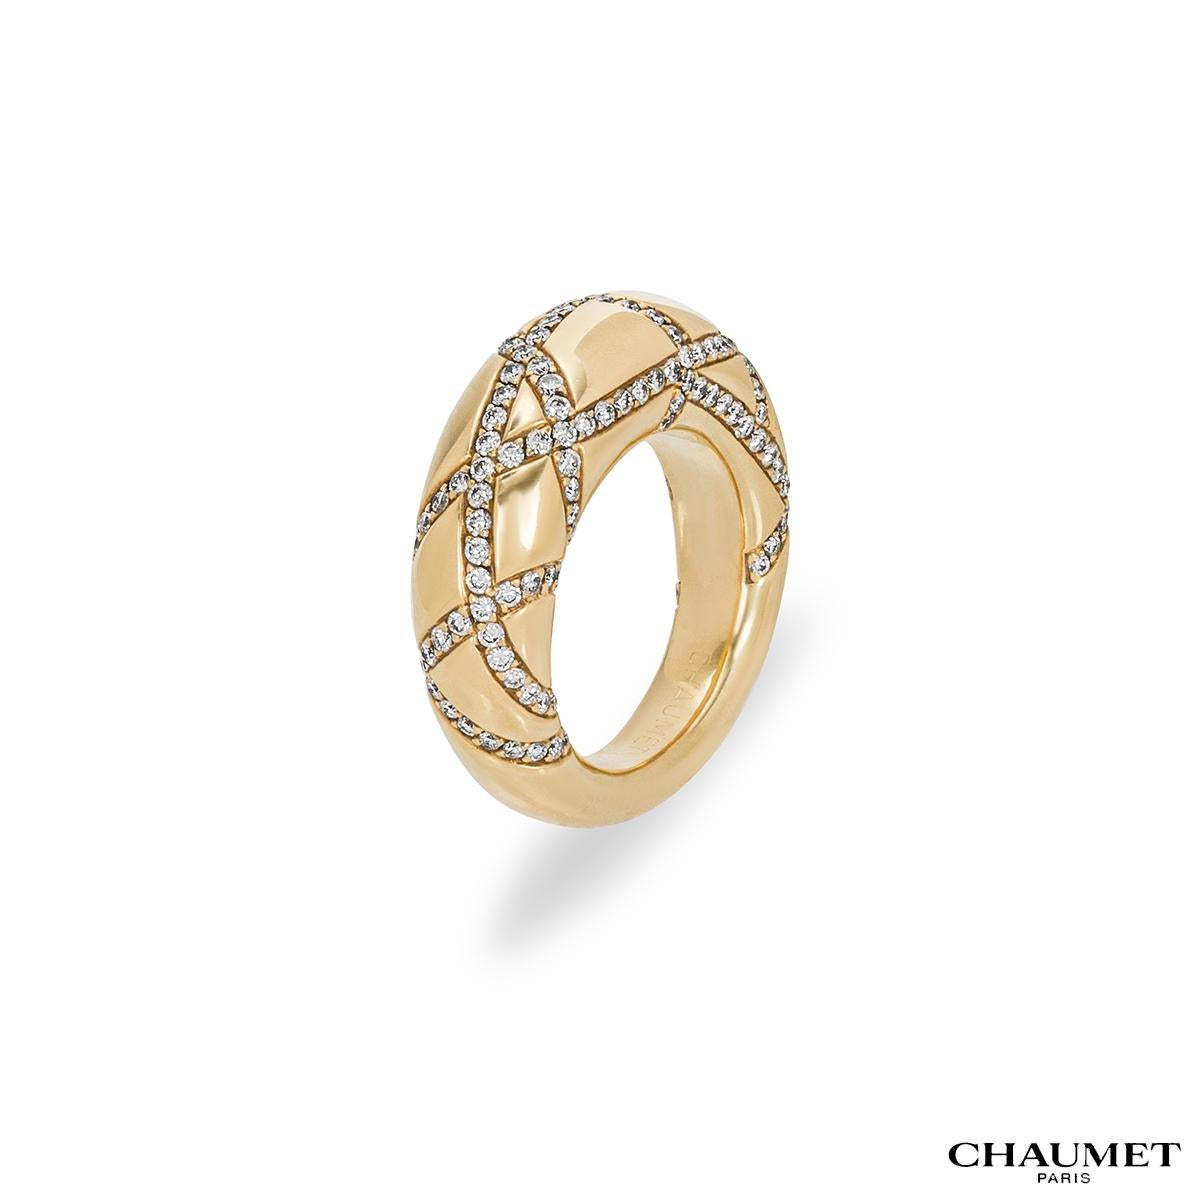 An 18k yellow gold diamond dress ring by Chaumet. The ring features a round brilliant cut diamond set crossover pattern. The diamonds have a total weight of approximately 1.20ct, G+ colour and VS+ clarity. The ring measures 9mm in width, is a UK N /